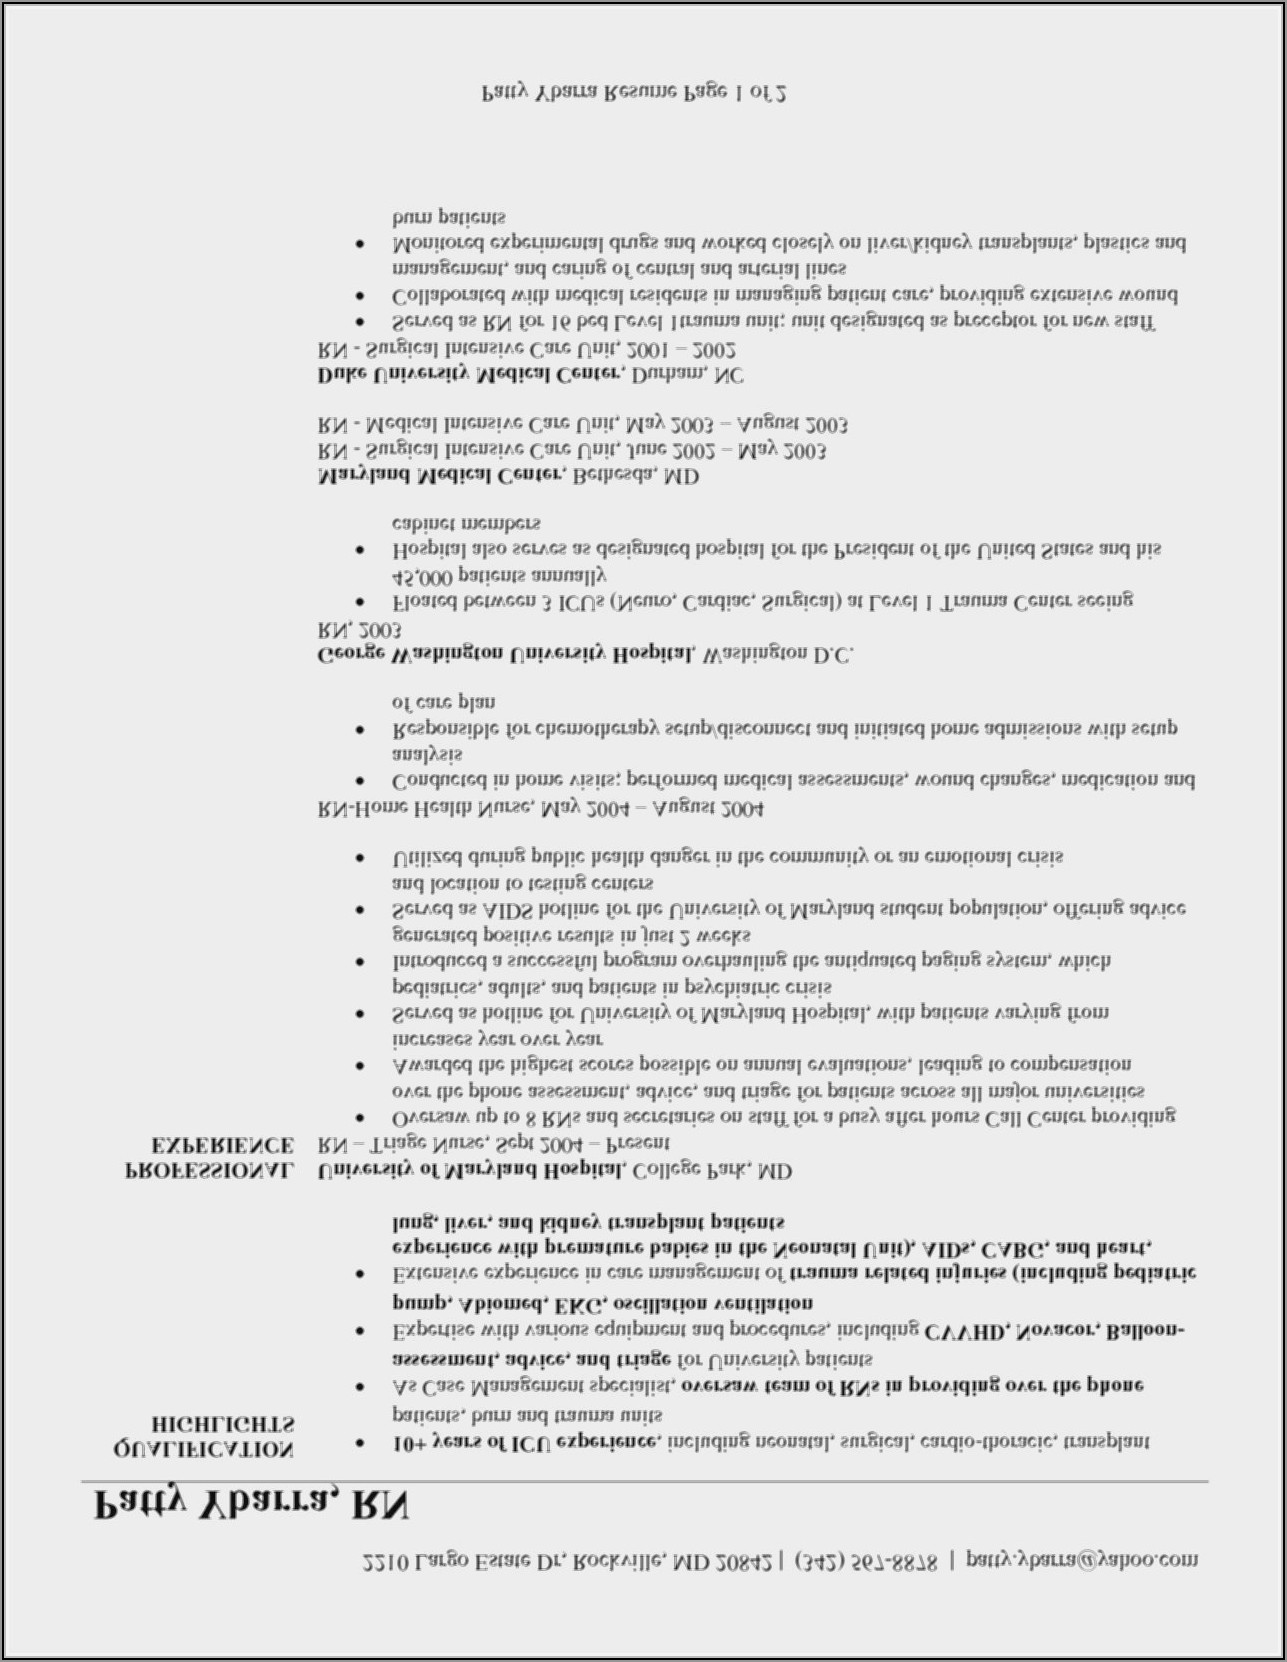 Free Actor Resume Template Word